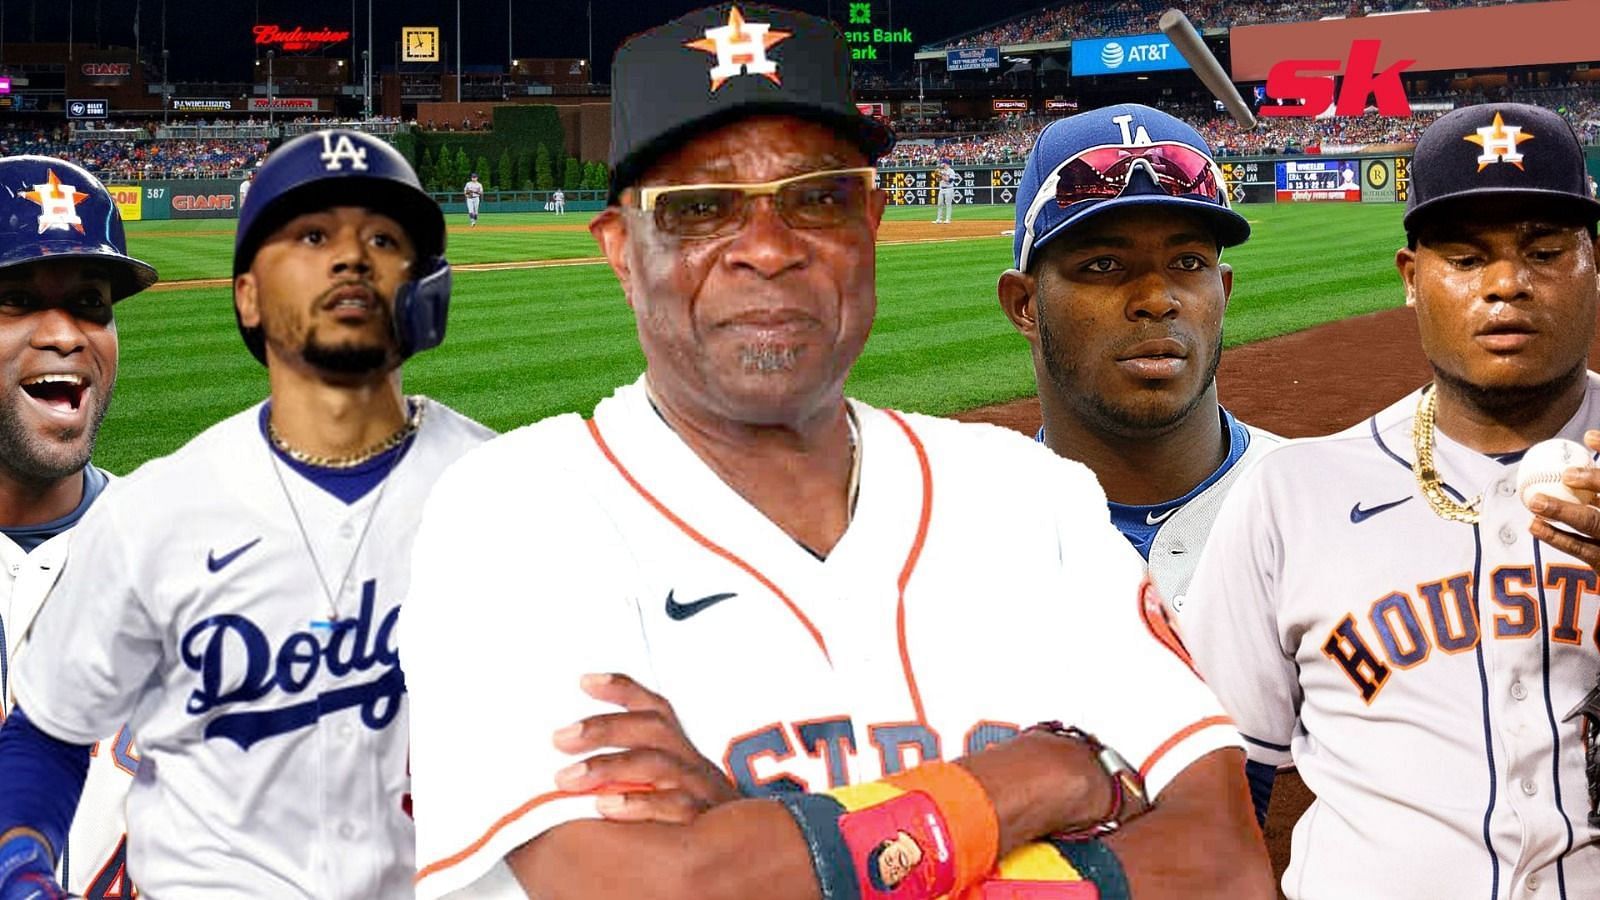 Astros manager Dusty Baker and African-American baseball players